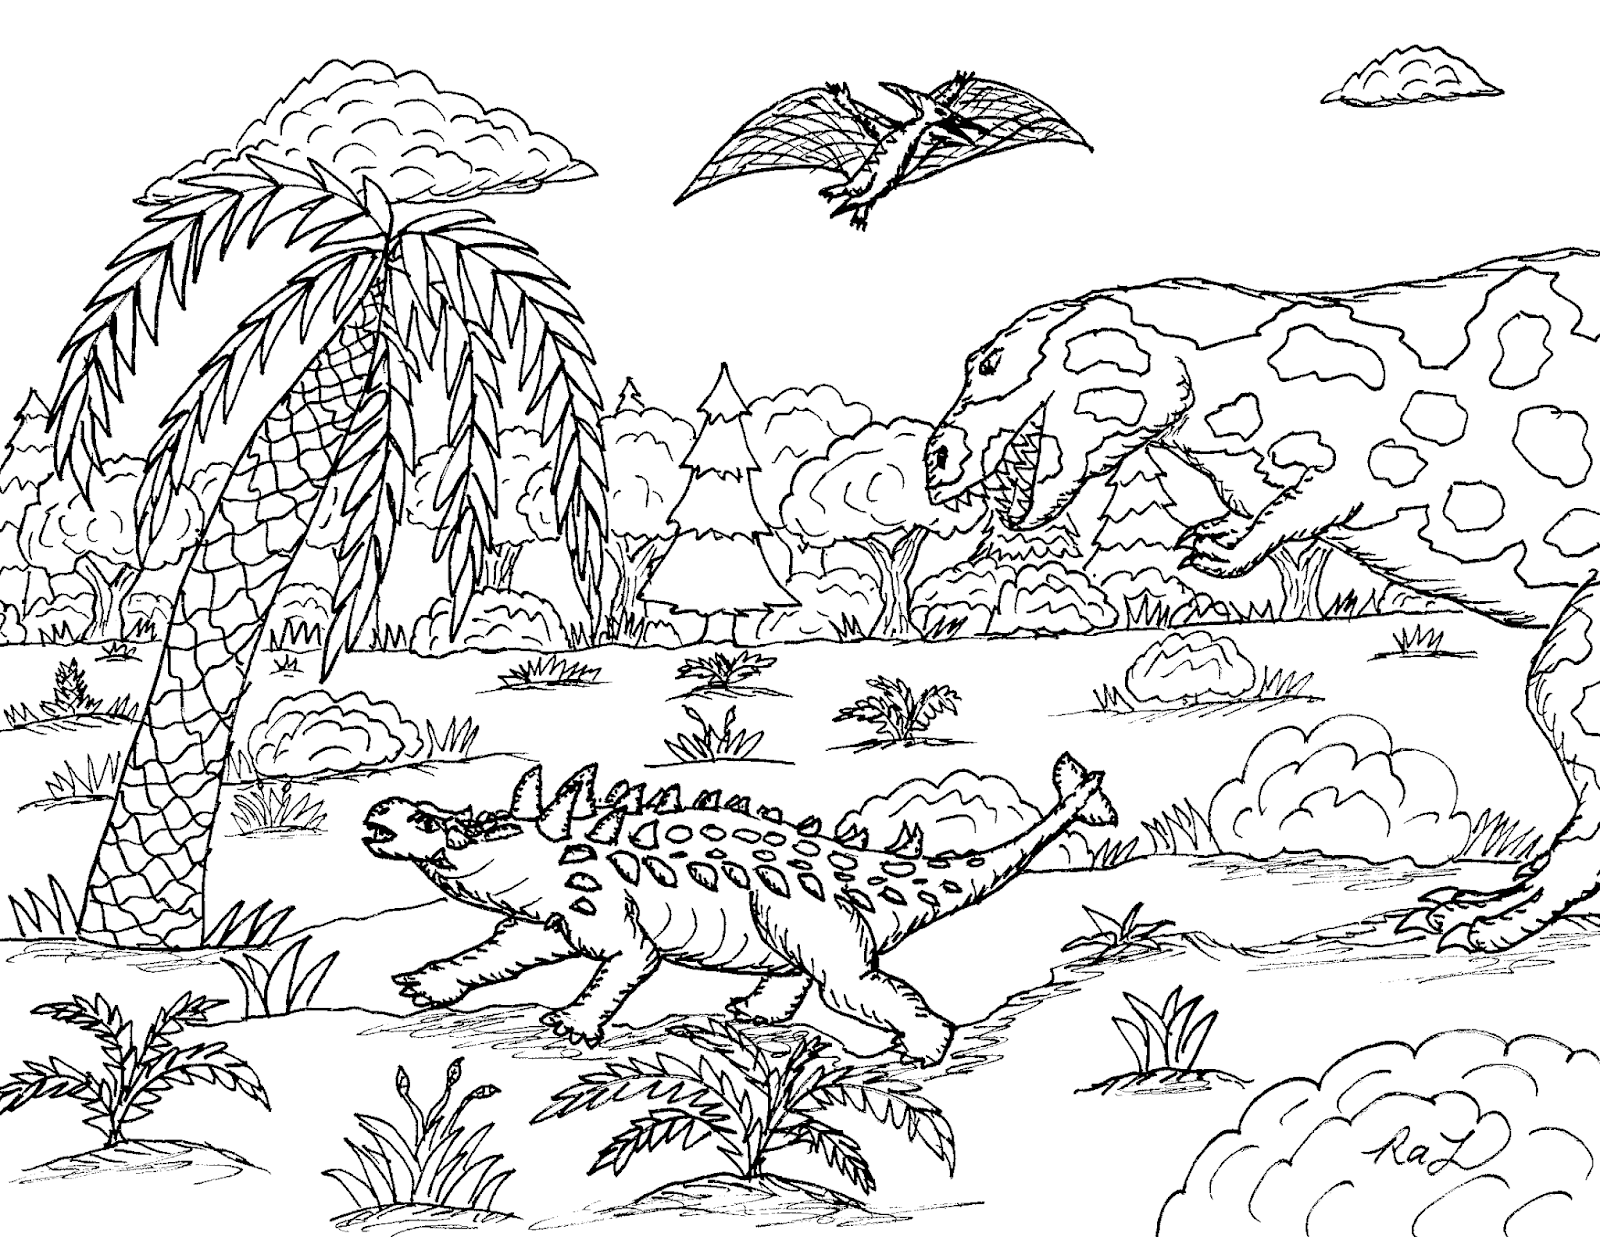 Download Robin's Great Coloring Pages: Ankylosaurus vs T. rex